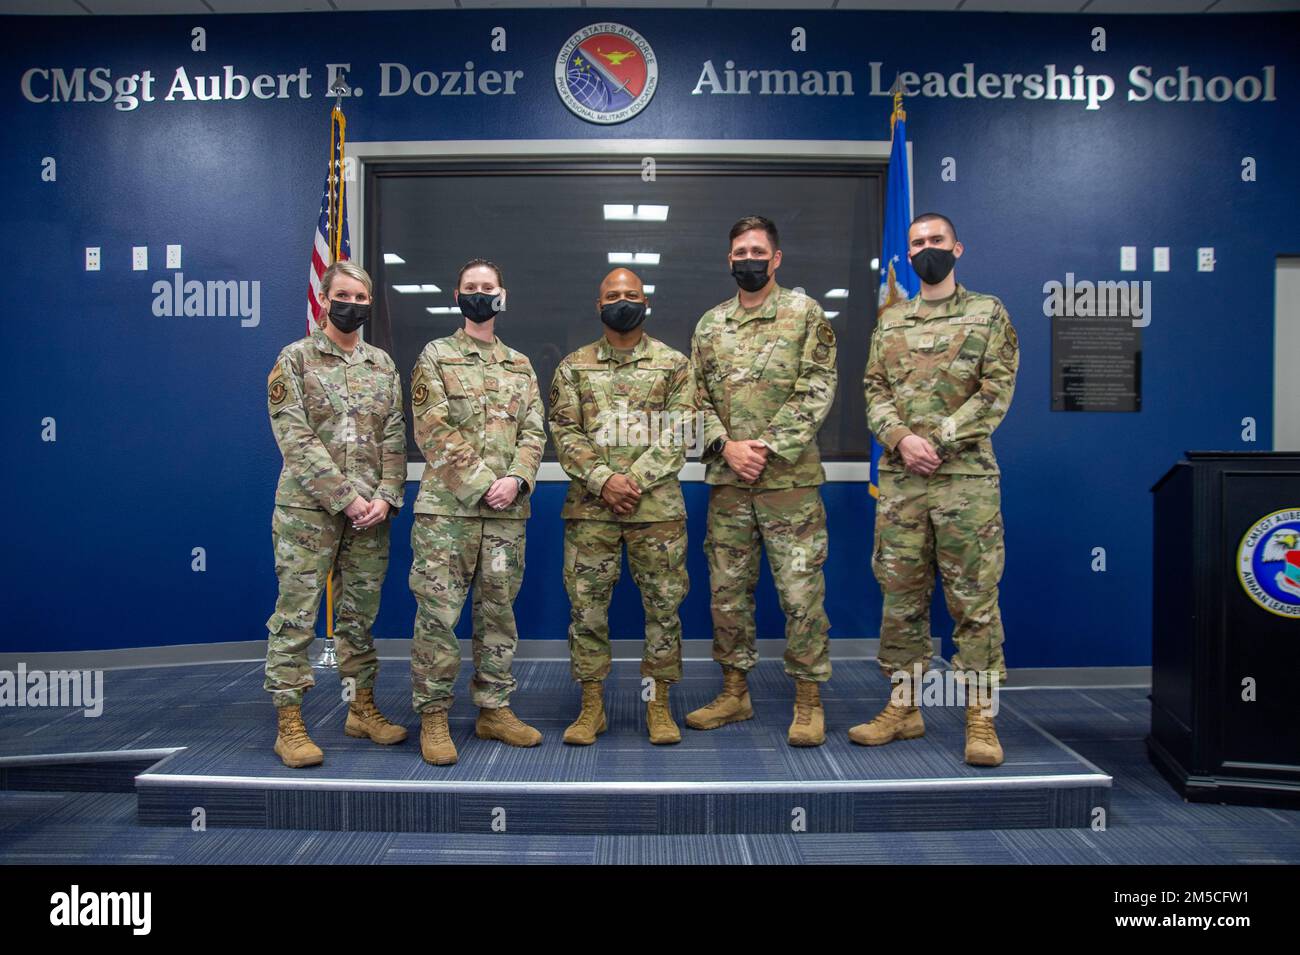 The Airman Leadership School (ALS) commandant and instructors pose for a photo in the Chief Master Sgt. Aubert E. Dozier ALS on March 1, 2022, at MacDill Air Force Base, Florida. The MacDill ALS team was recently nominated as the Air Mobility Command’s ALS of the Year and will compete against other major commands across the Air Force for ALS of the Year. Stock Photo